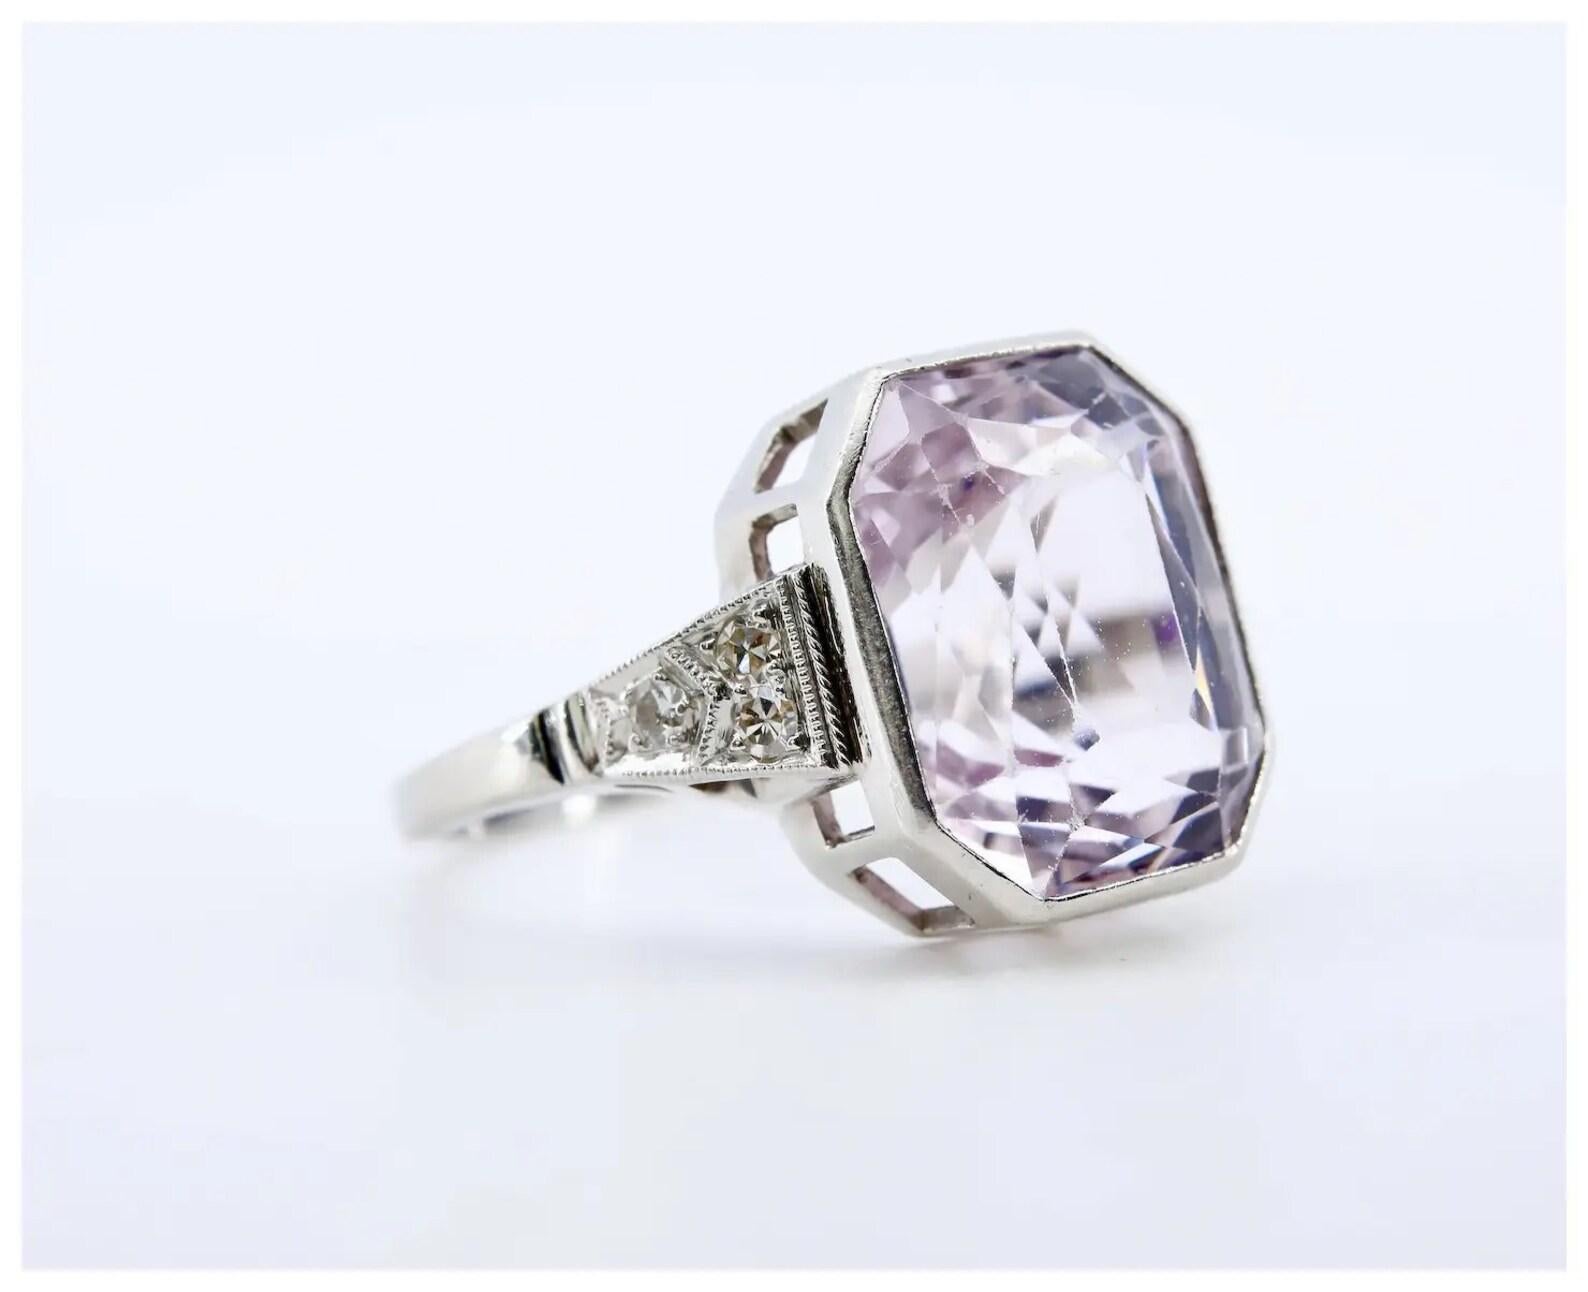 An Art Deco period kunzite, and pave set diamond cocktail ring in platinum.

Centered by an 8.75 carat bezel set pale pink kunzite.

Accented by six pave set diamonds of 0.12ctw with G color and VS2 clarity.

Hallmarked, and tested as